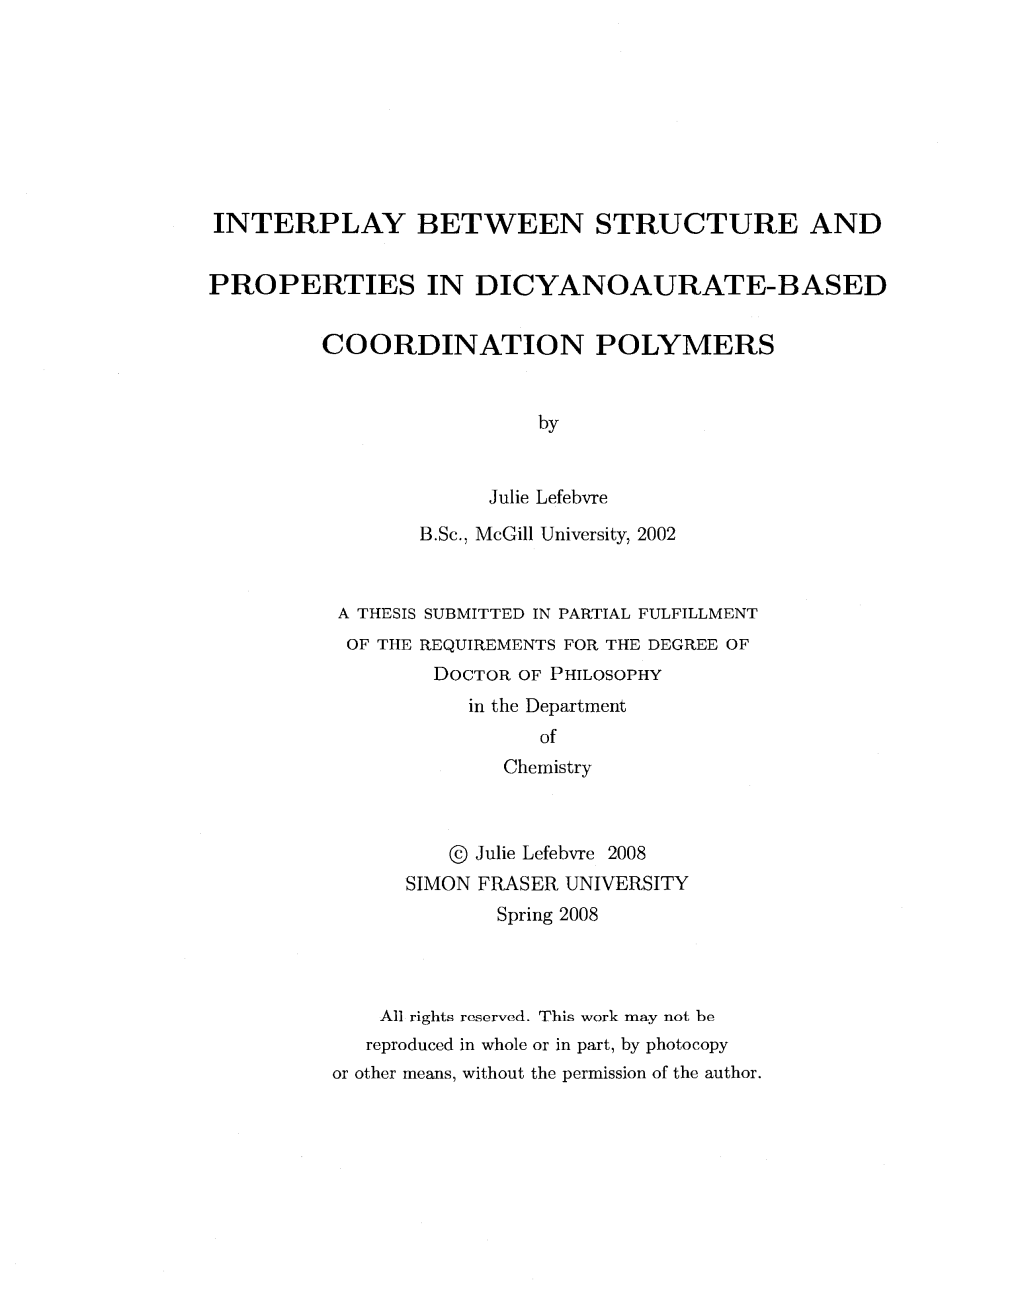 Interplay Between Structure and Properties in Dicyanoaurate-Based Coordination Polymers